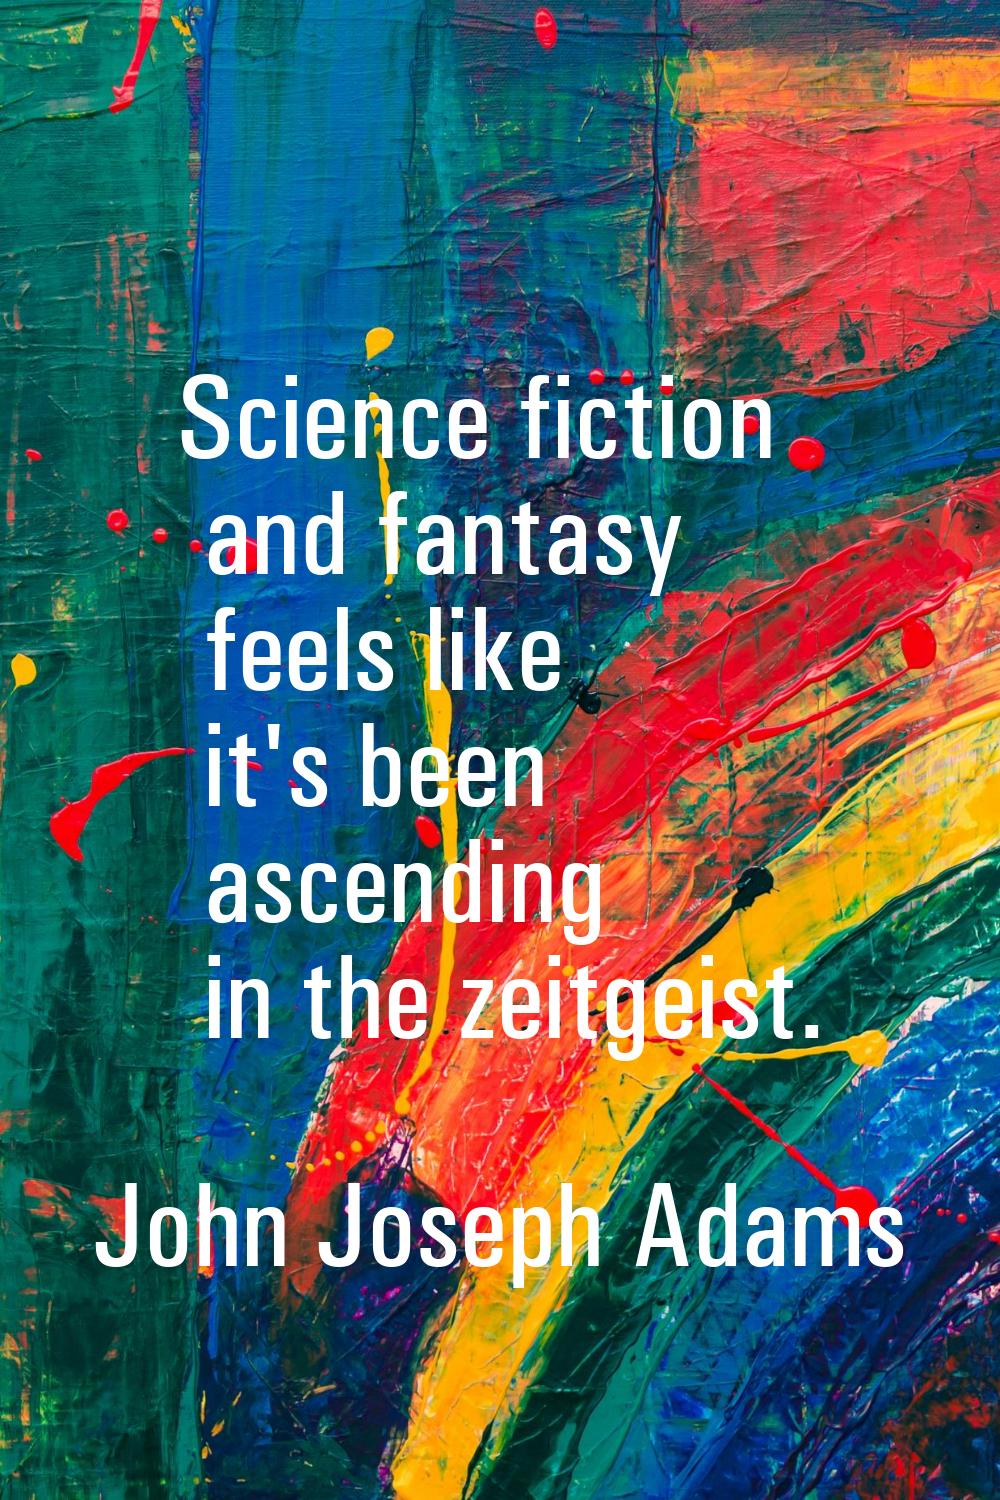 Science fiction and fantasy feels like it's been ascending in the zeitgeist.